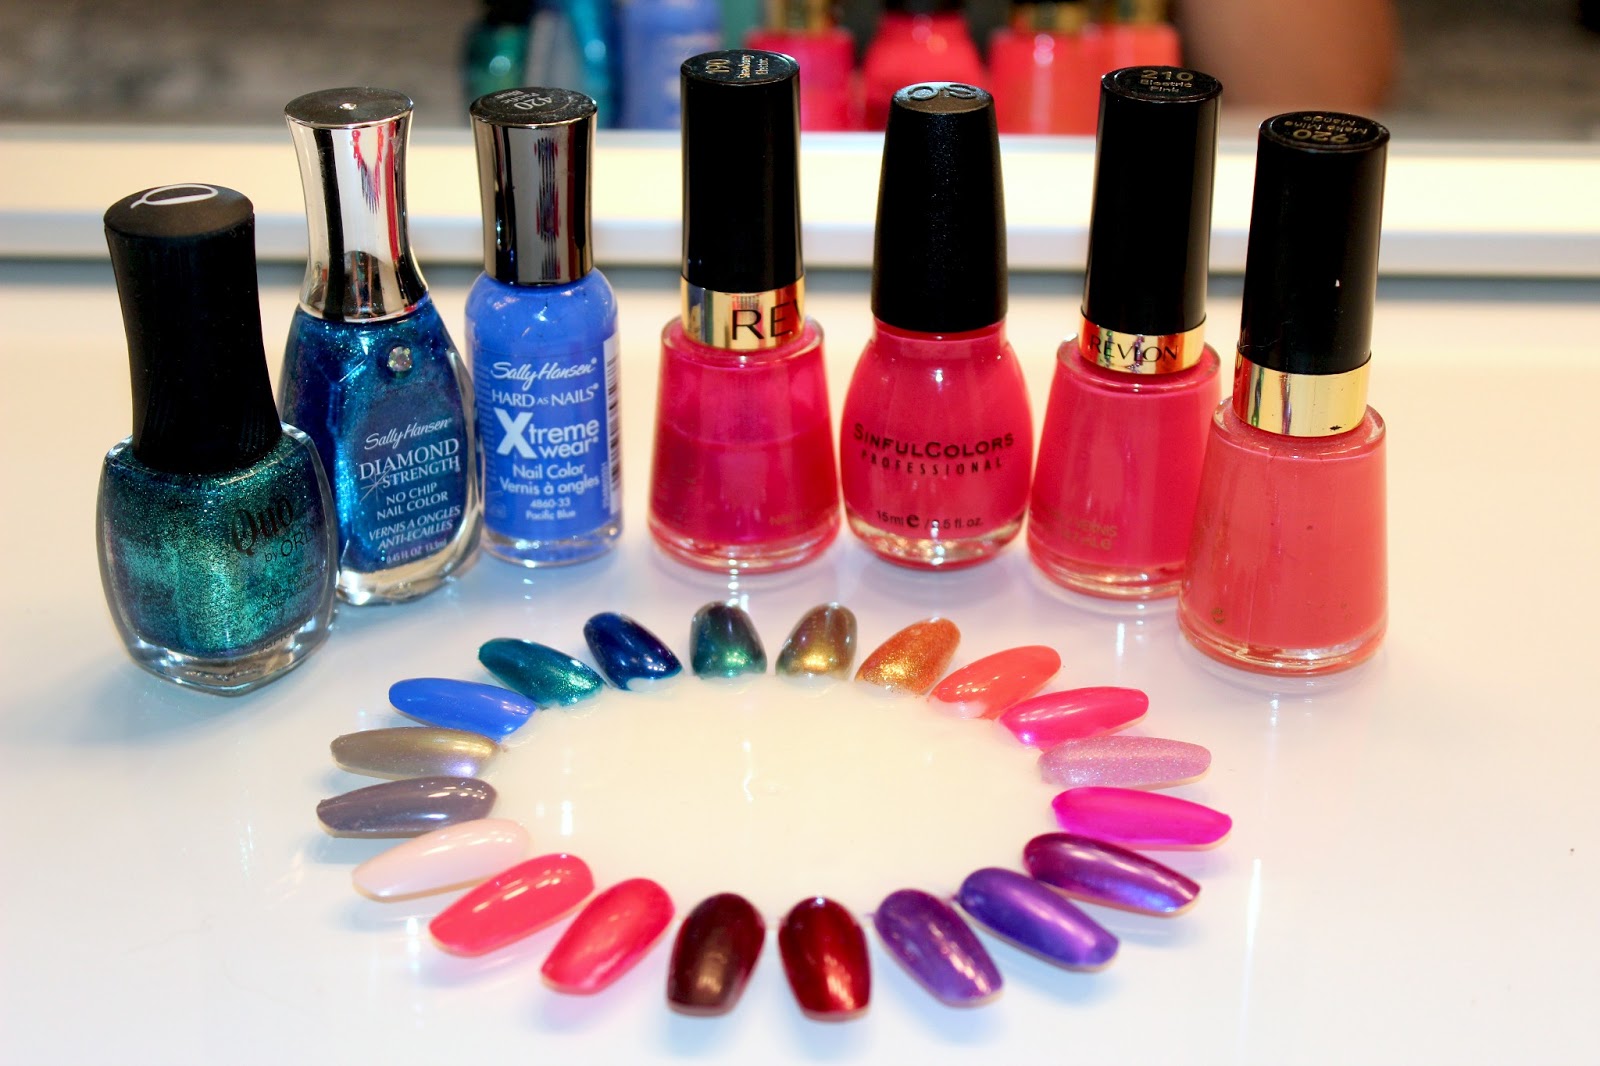 8. "Nail polish shades to enhance red feet: Our top choices" - wide 9